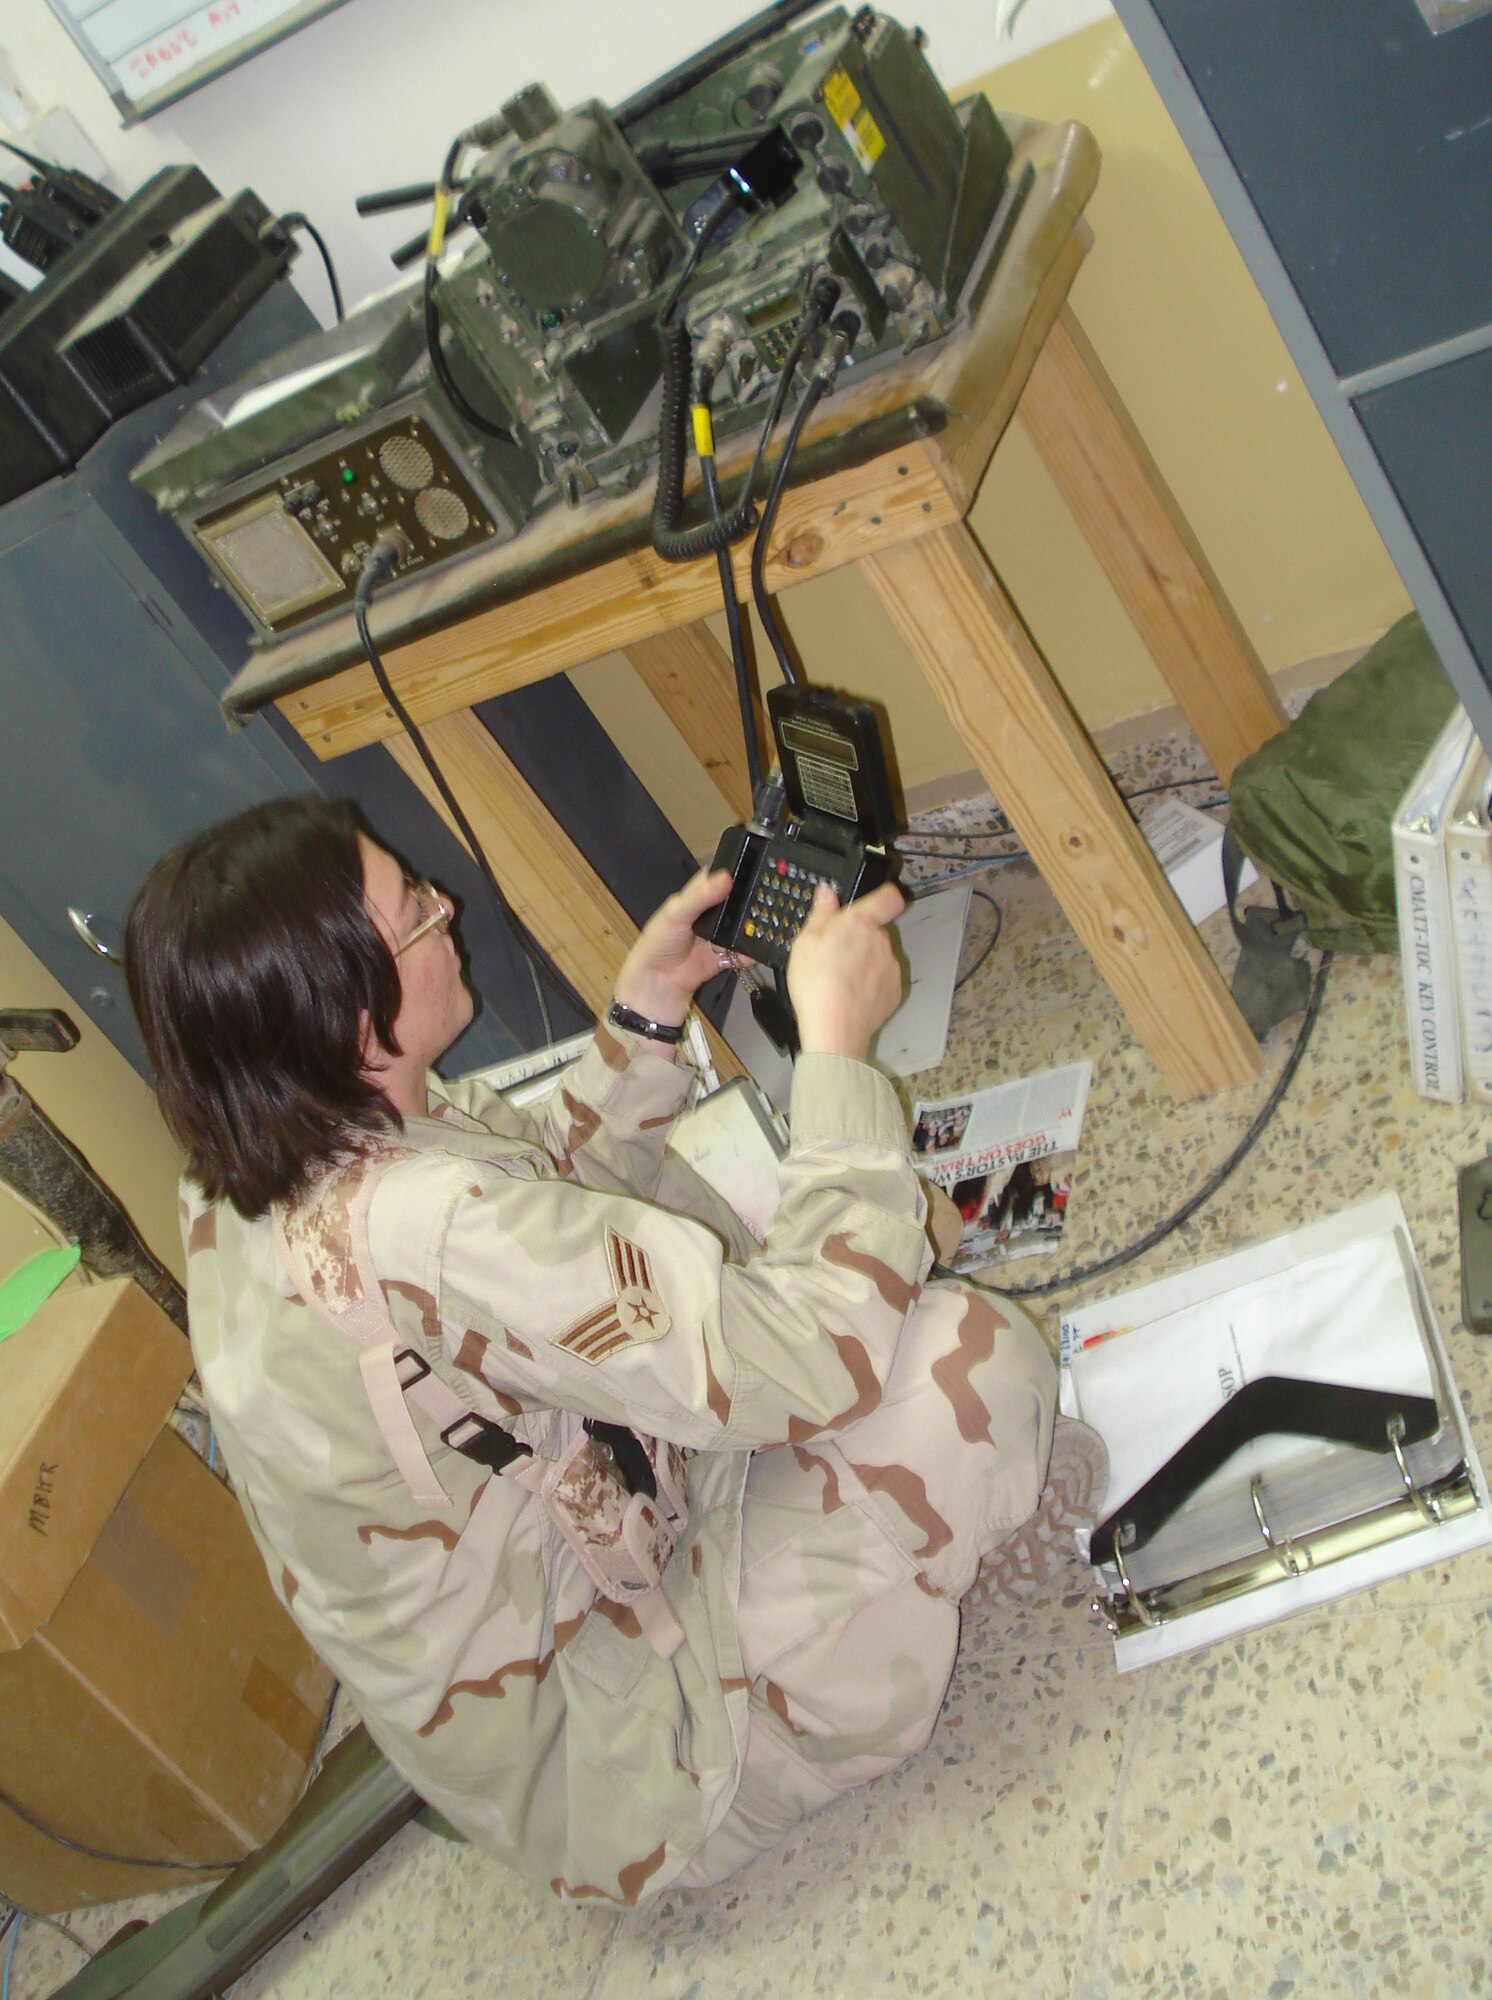 Senior Airman Jennifer Noyes, 1st Air and Space Communications Squadron, prepares tactical radios for convoys, during her 365-day deployment to Baghdad. Airman Noyes was awarded the Defense Meritorious Service Medal for her accomplishments during the deployment. (Courtesy photo)